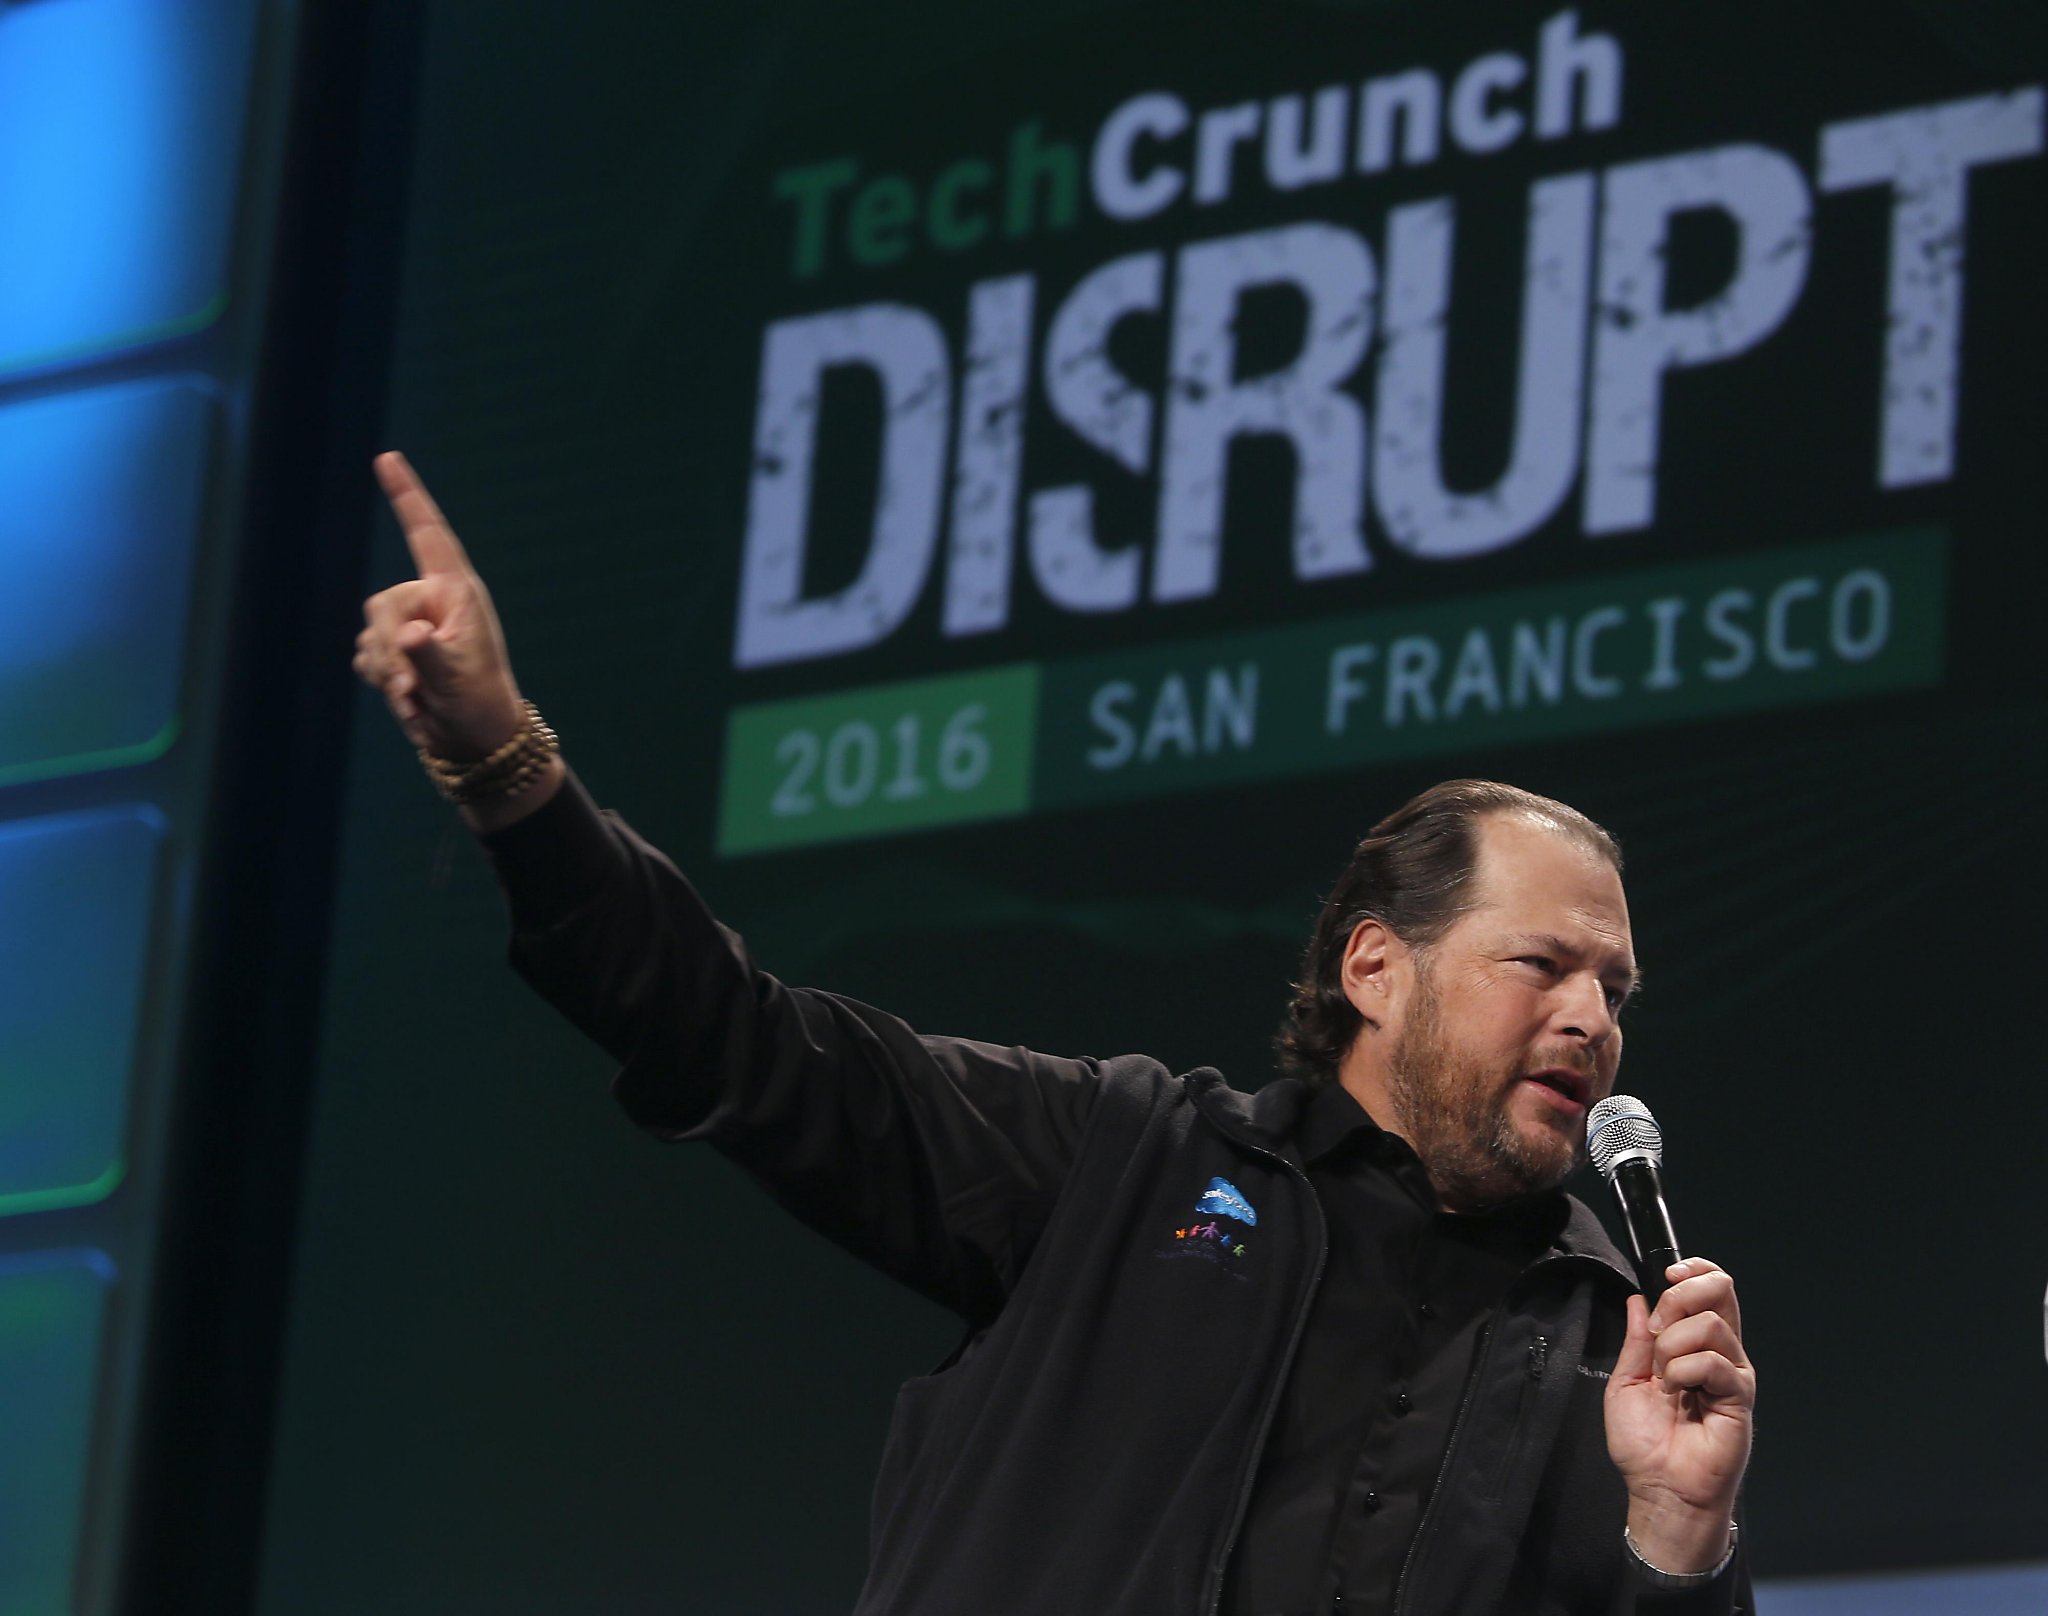 TechCrunch Disrupt shows an industry grappling with diversity